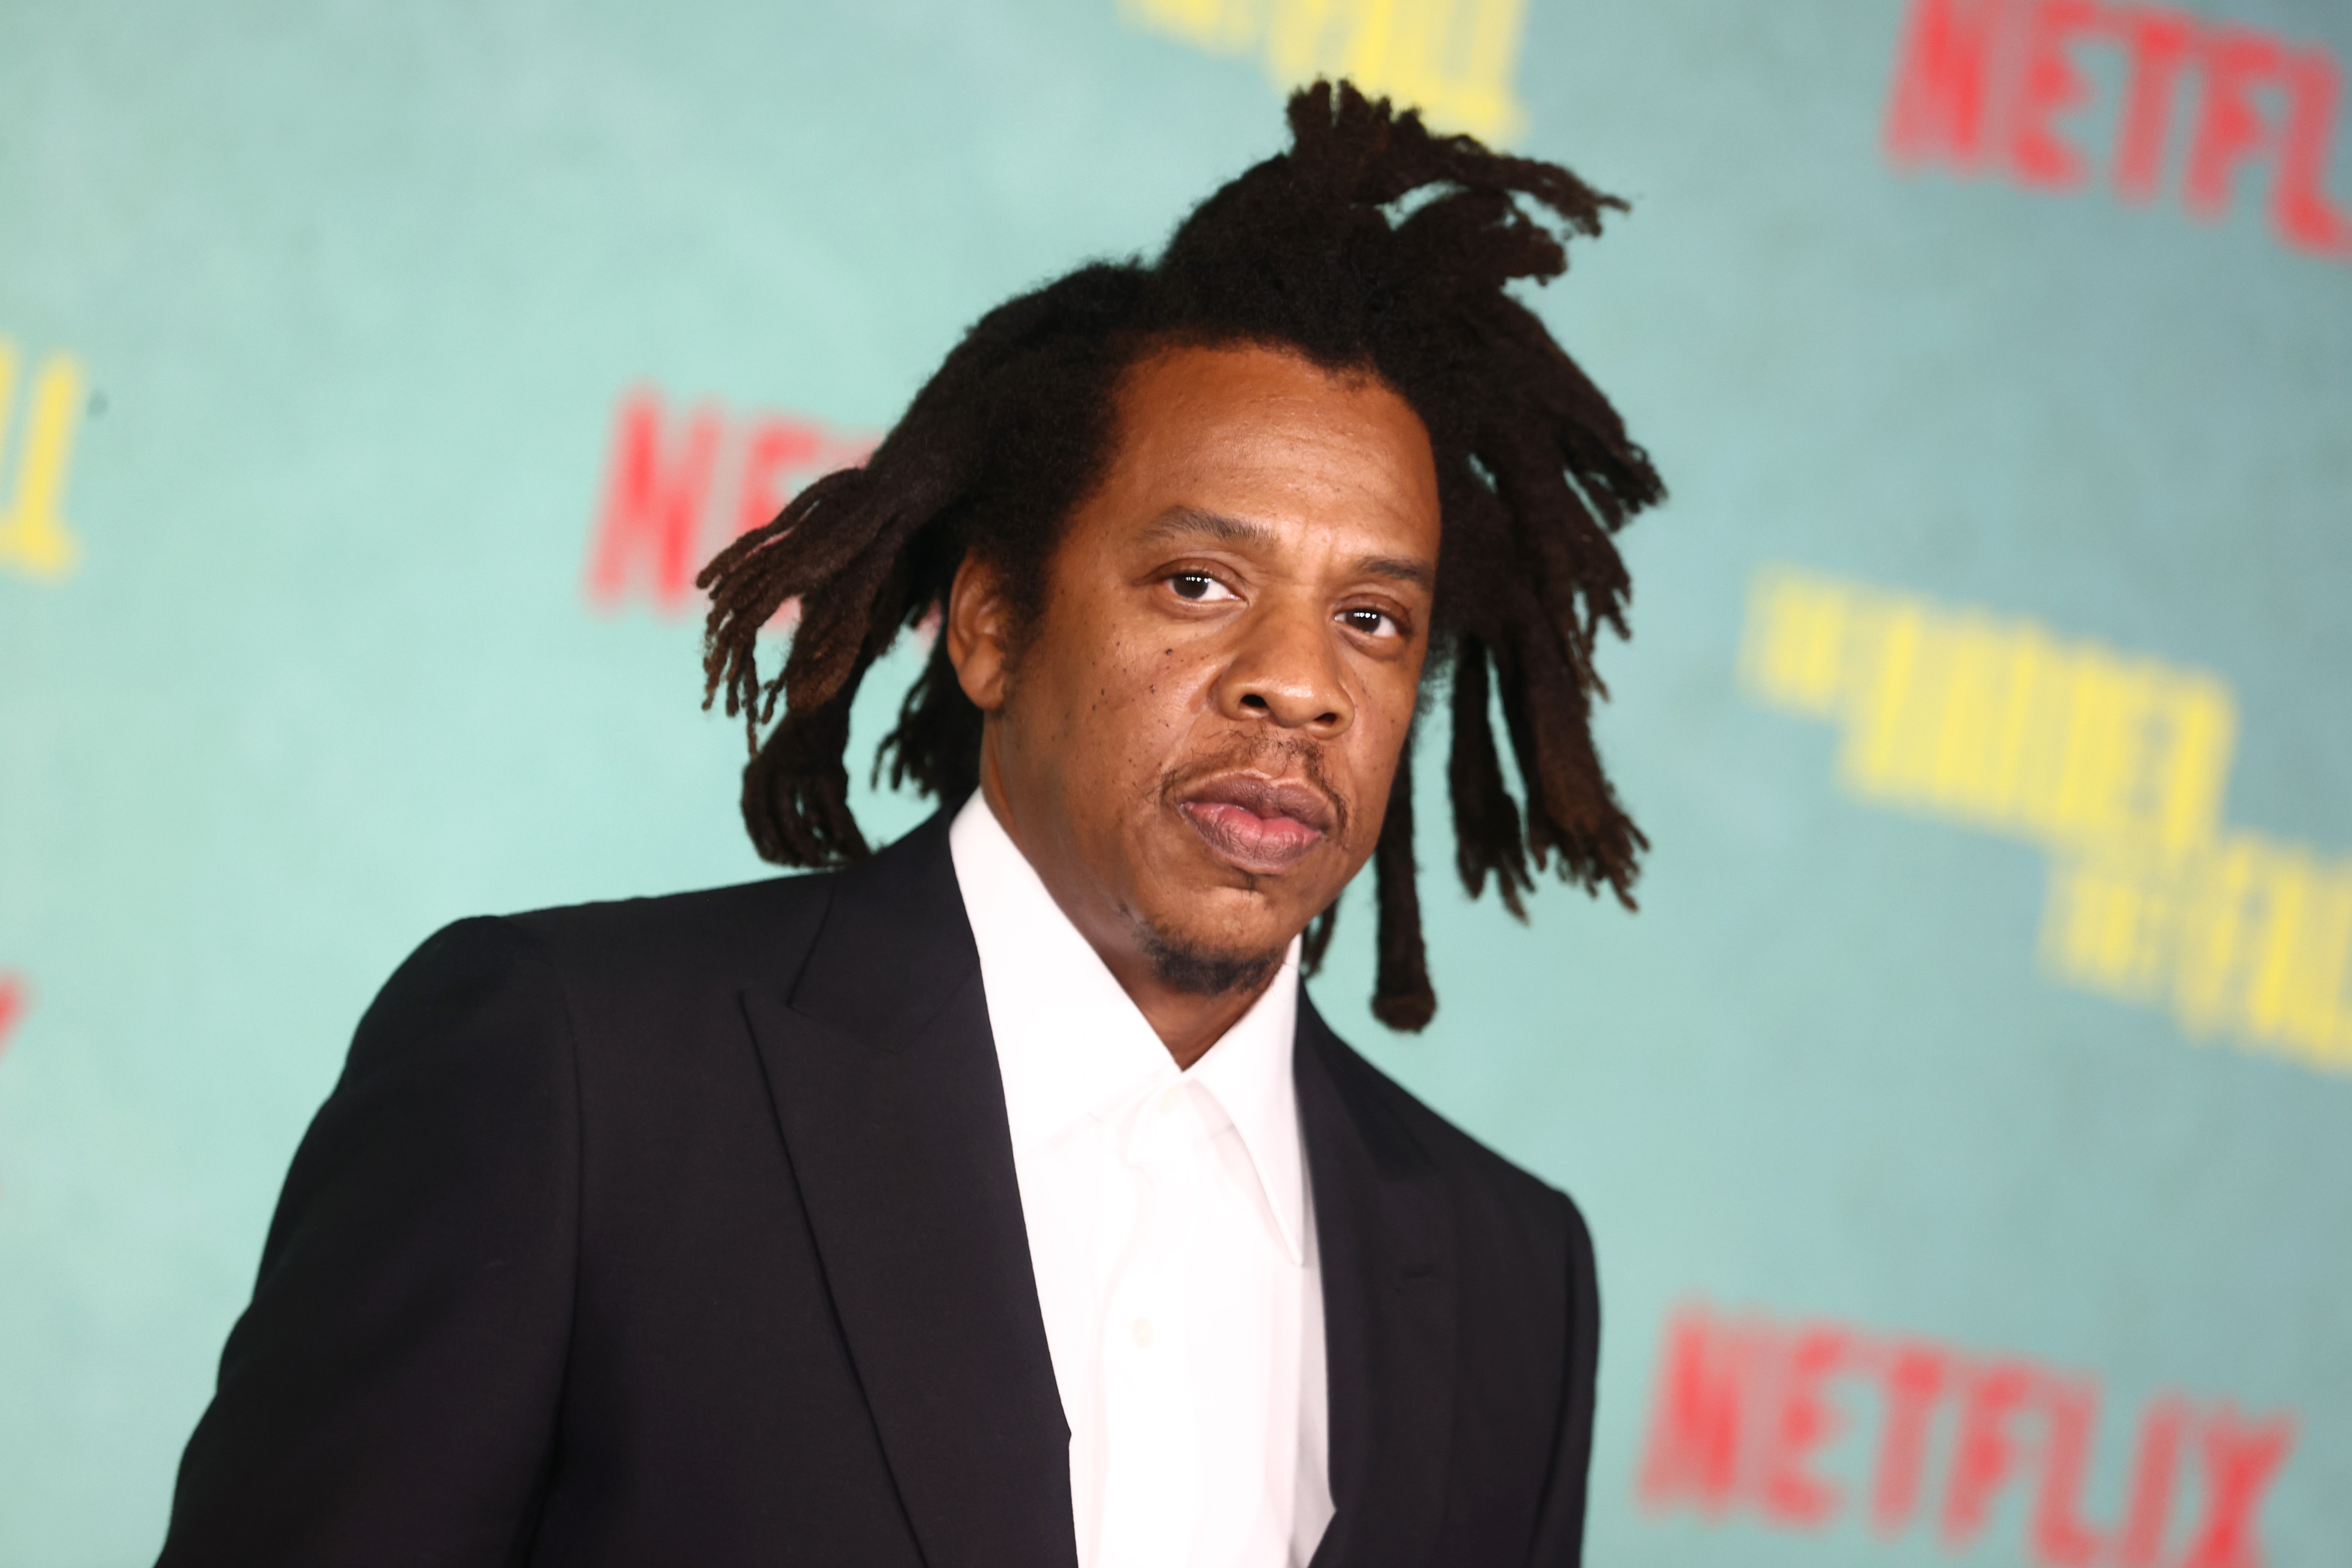 Jay-Z Deletes IG 24 Hours After Amassing 1 Million Followers